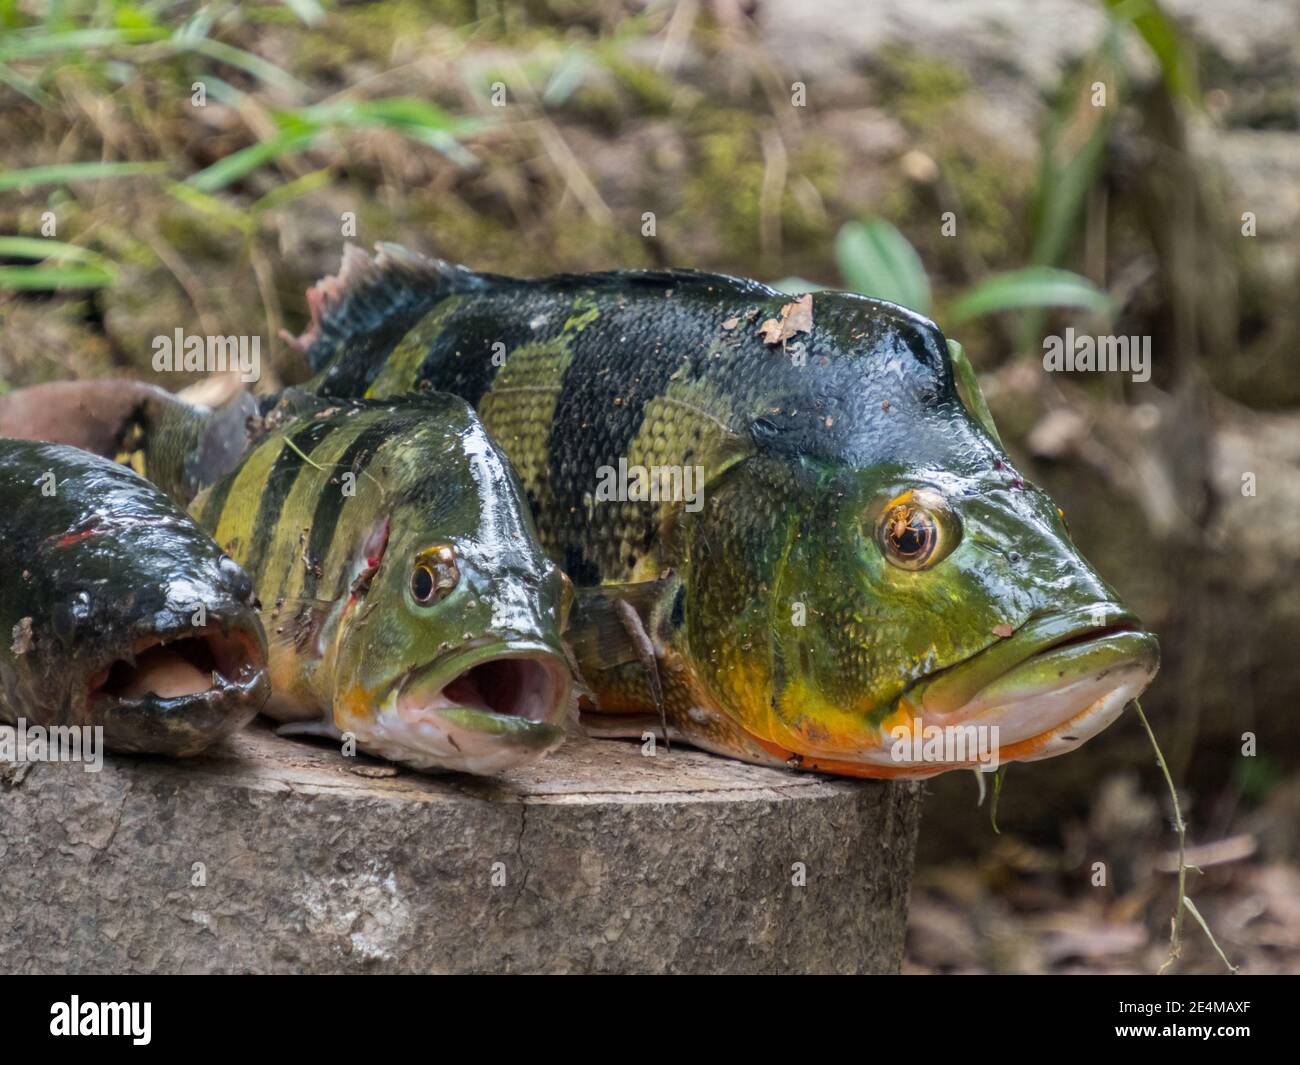 South American fishes. Original name: Peacock Cichlid, Cichla ocellaris. Peacock Bass, Cichlidae family, Amazonia. Stock Photo